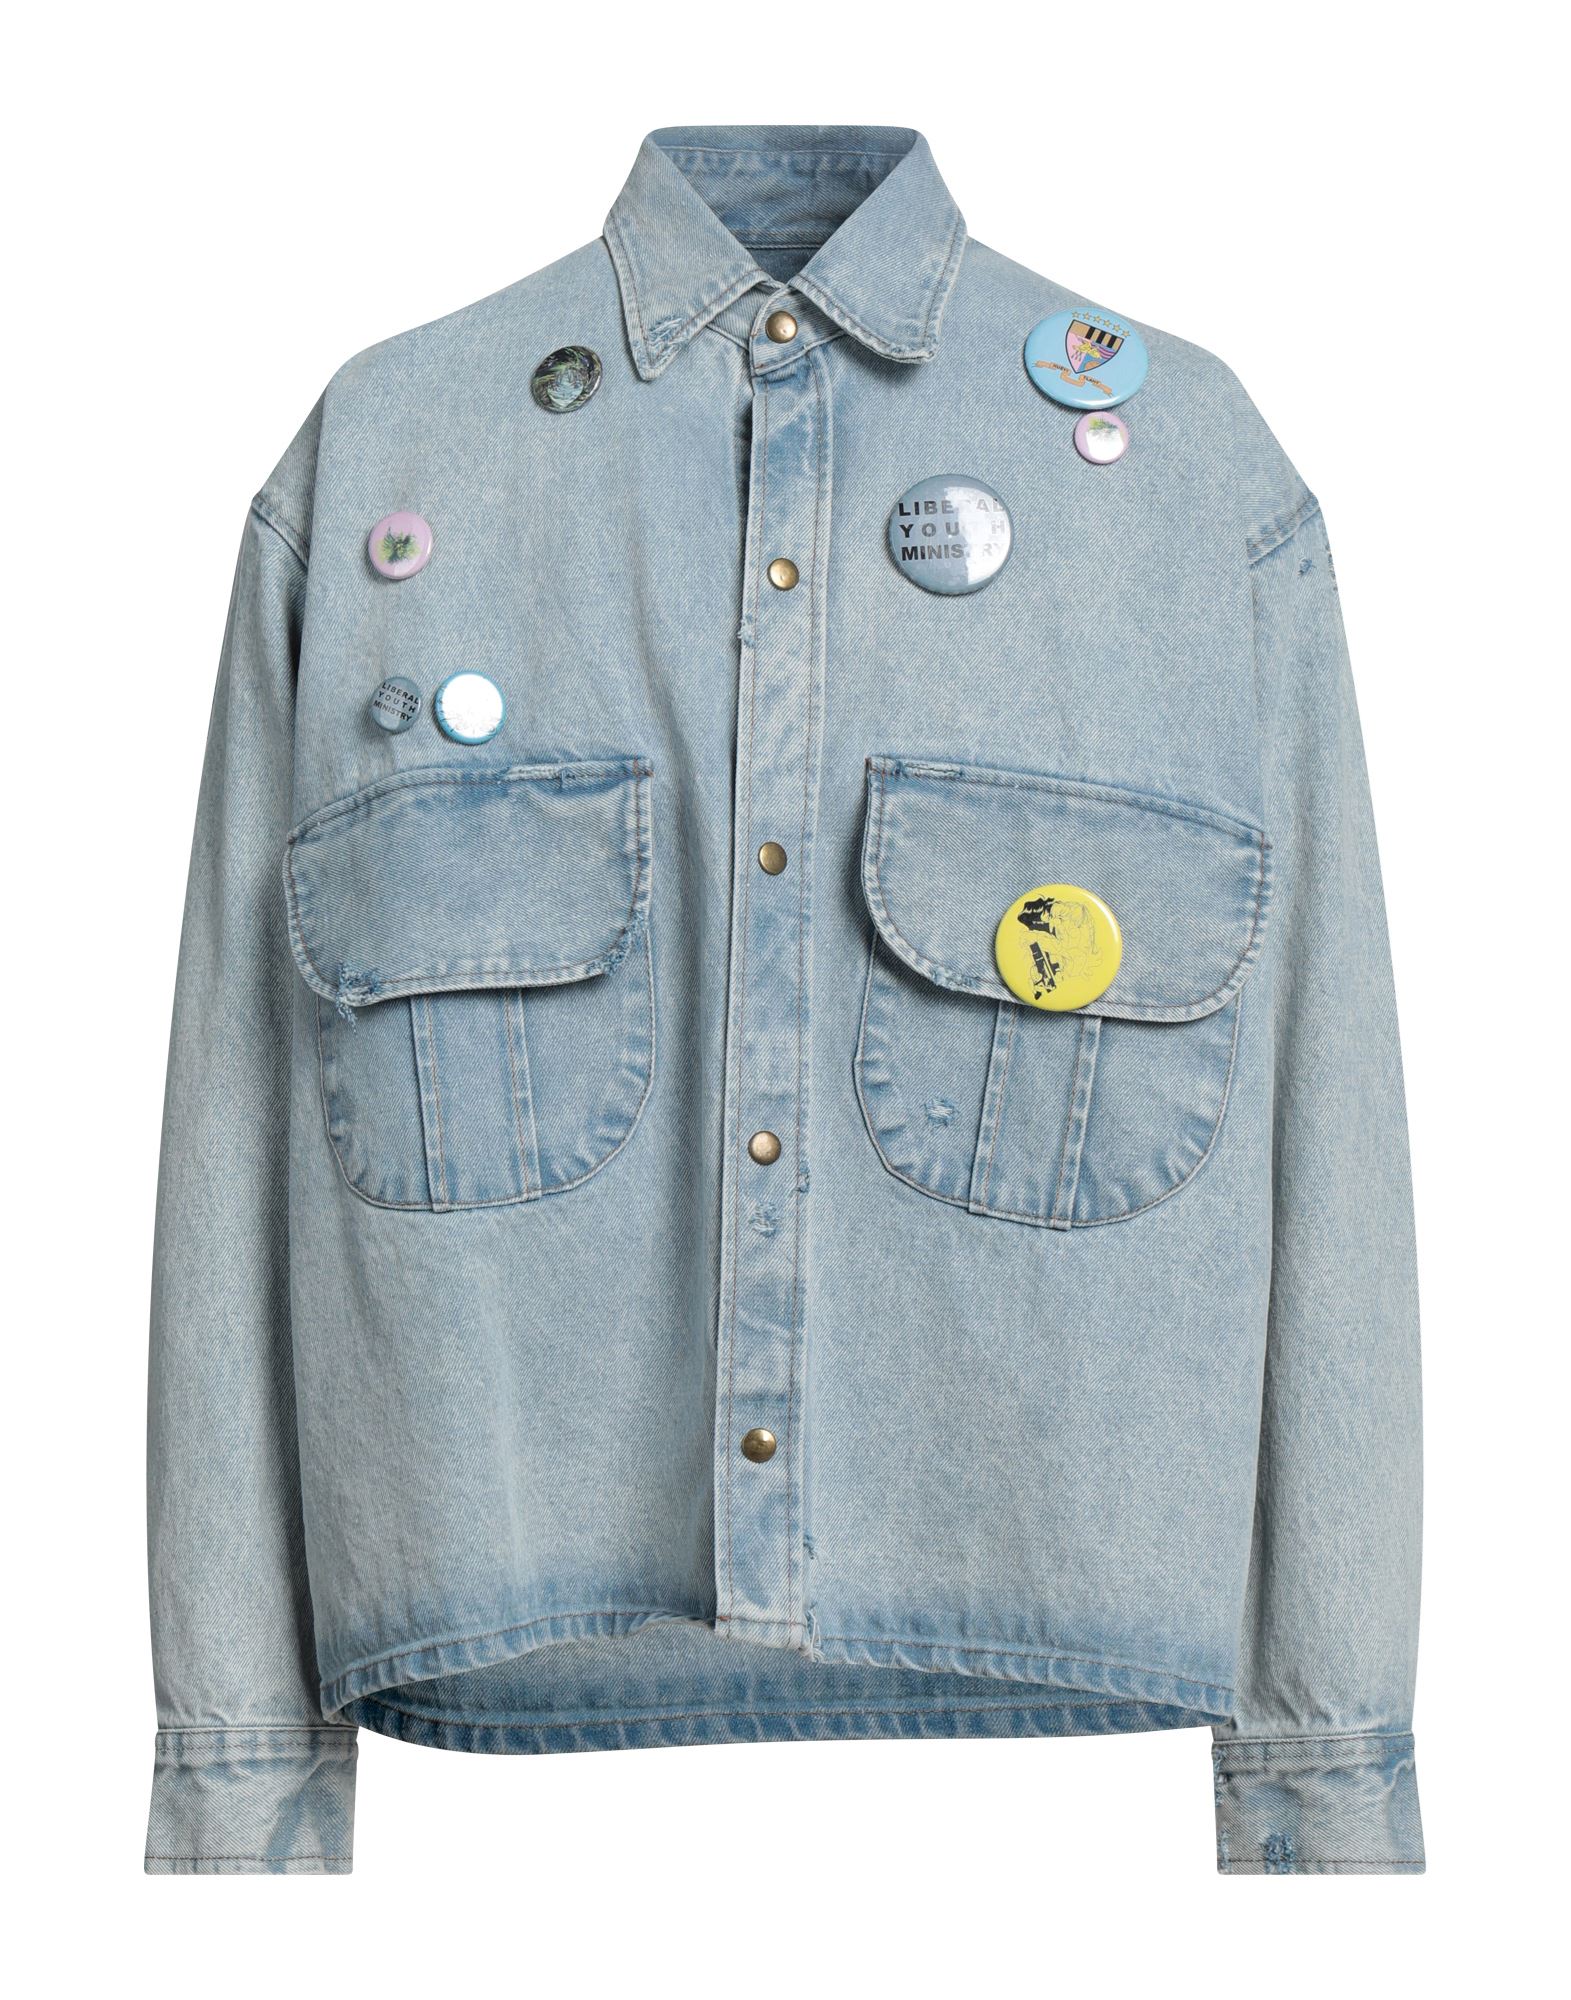 Liberal Youth Ministry Denim Outerwear In Blue